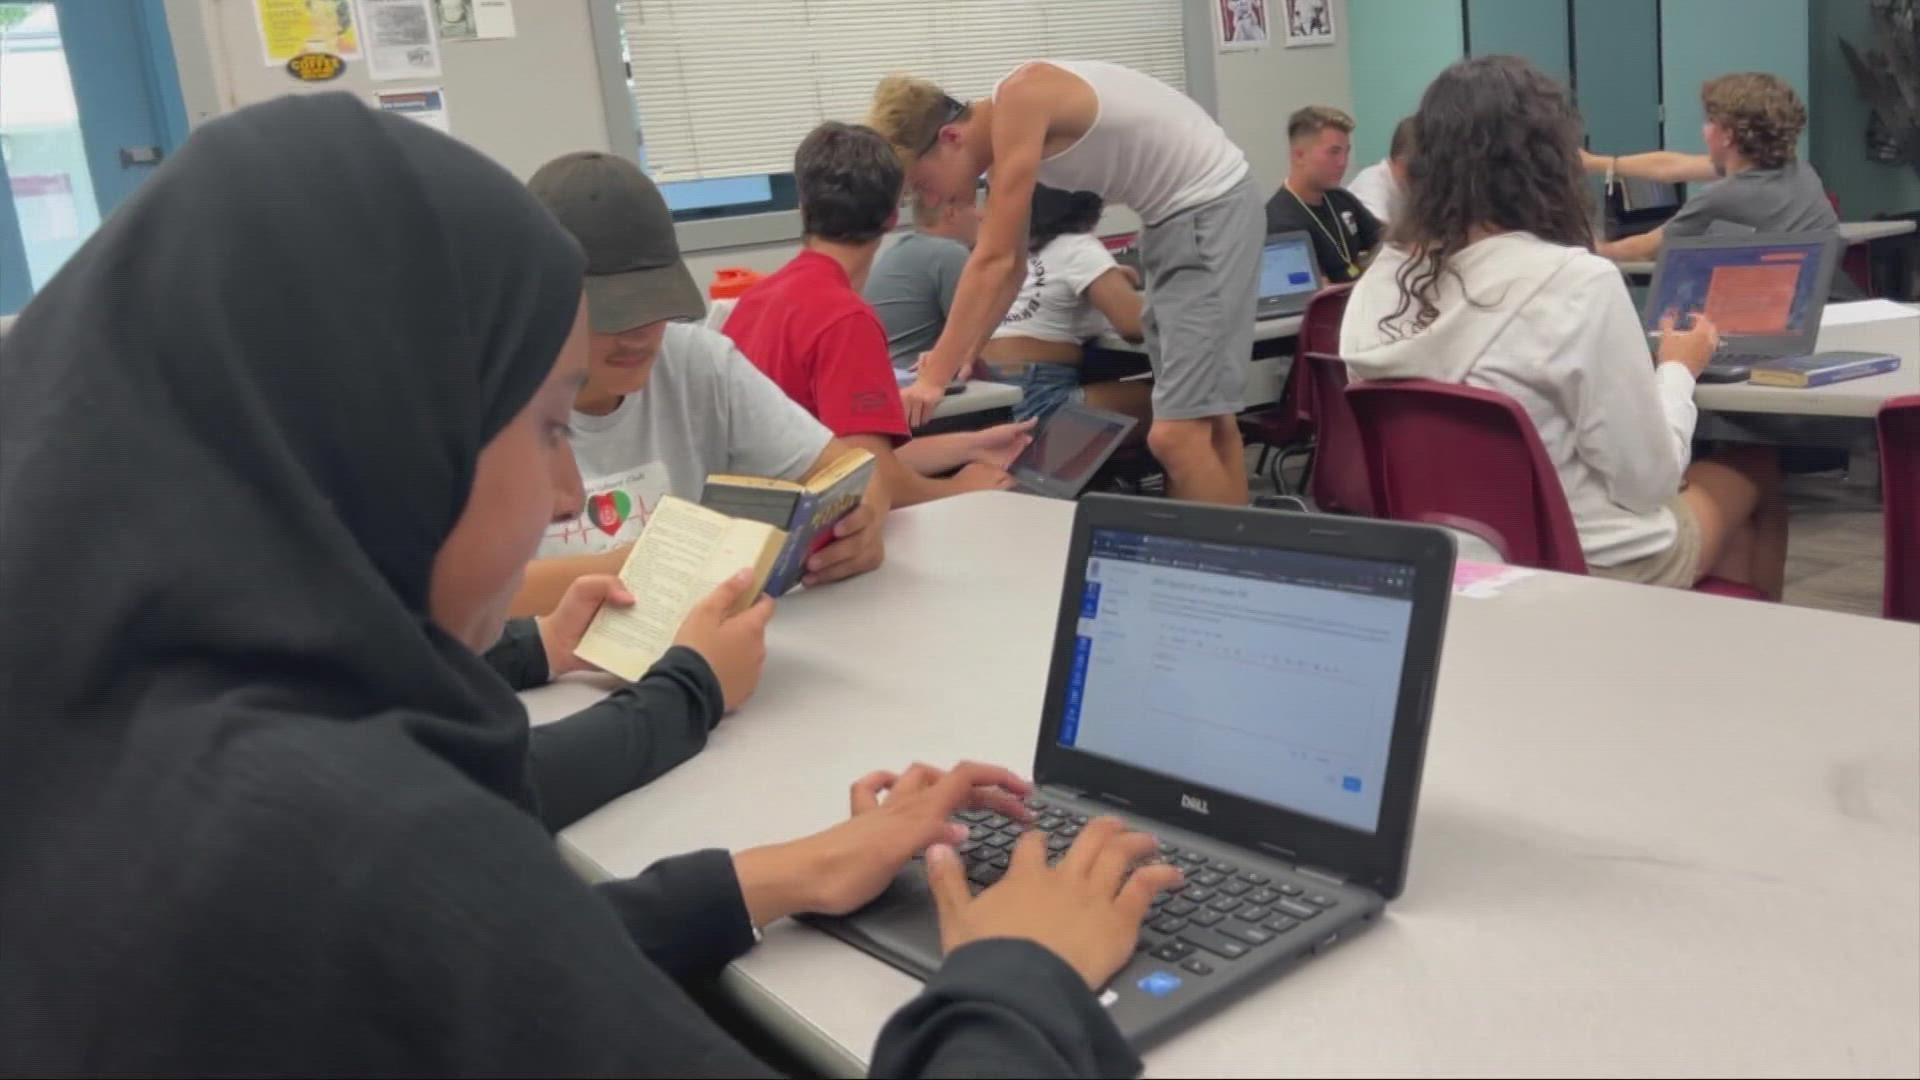 Woodcreek High School in Roseville has more Afghan refugees than any other in Placer County.